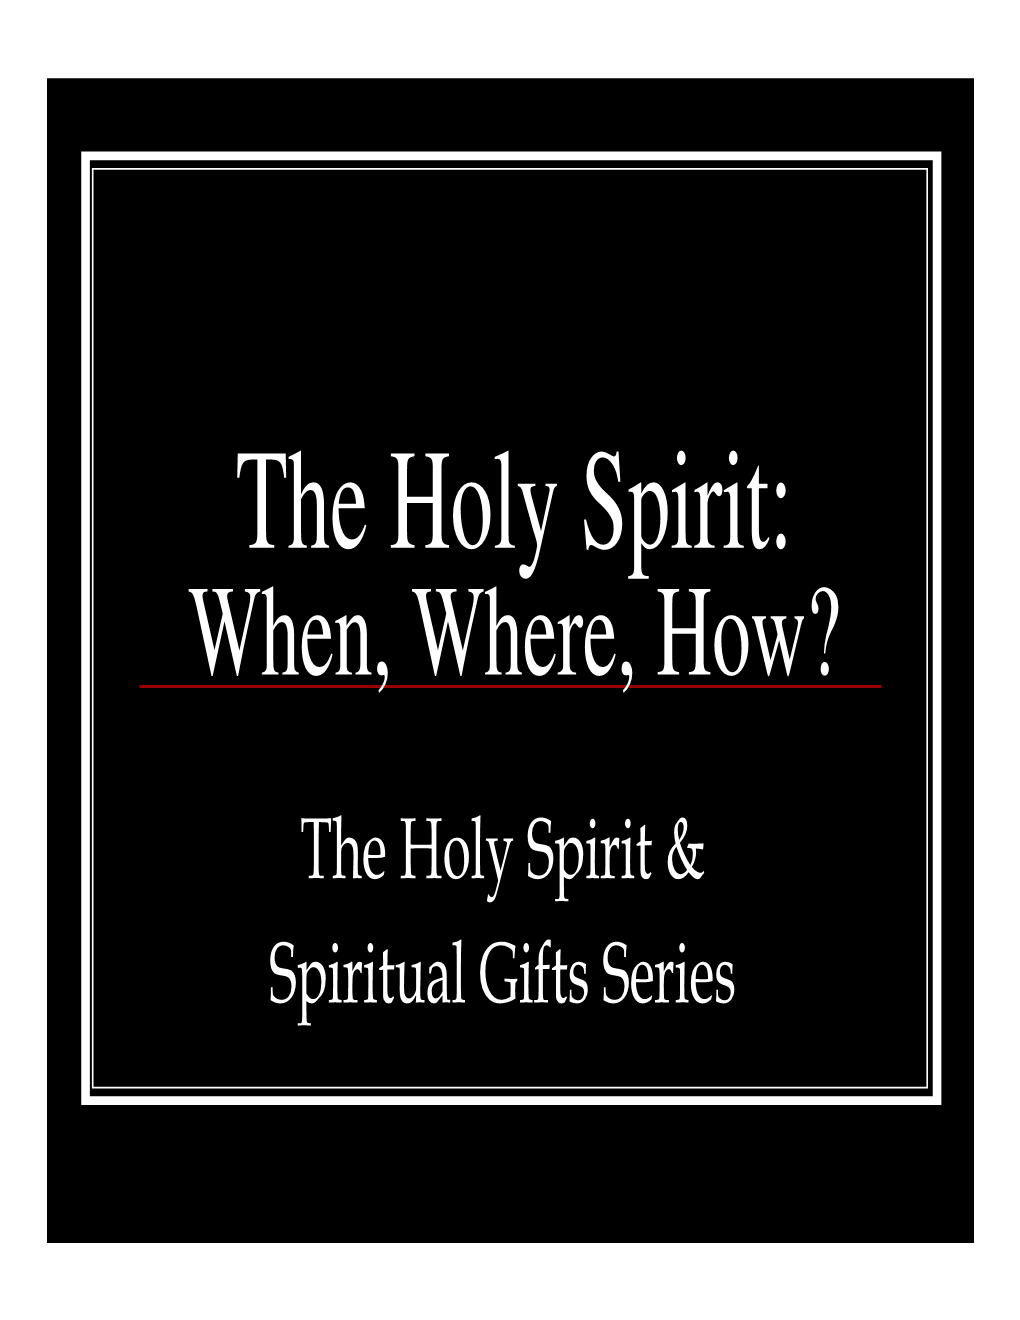 The Holy Spirit: When, Where, How?